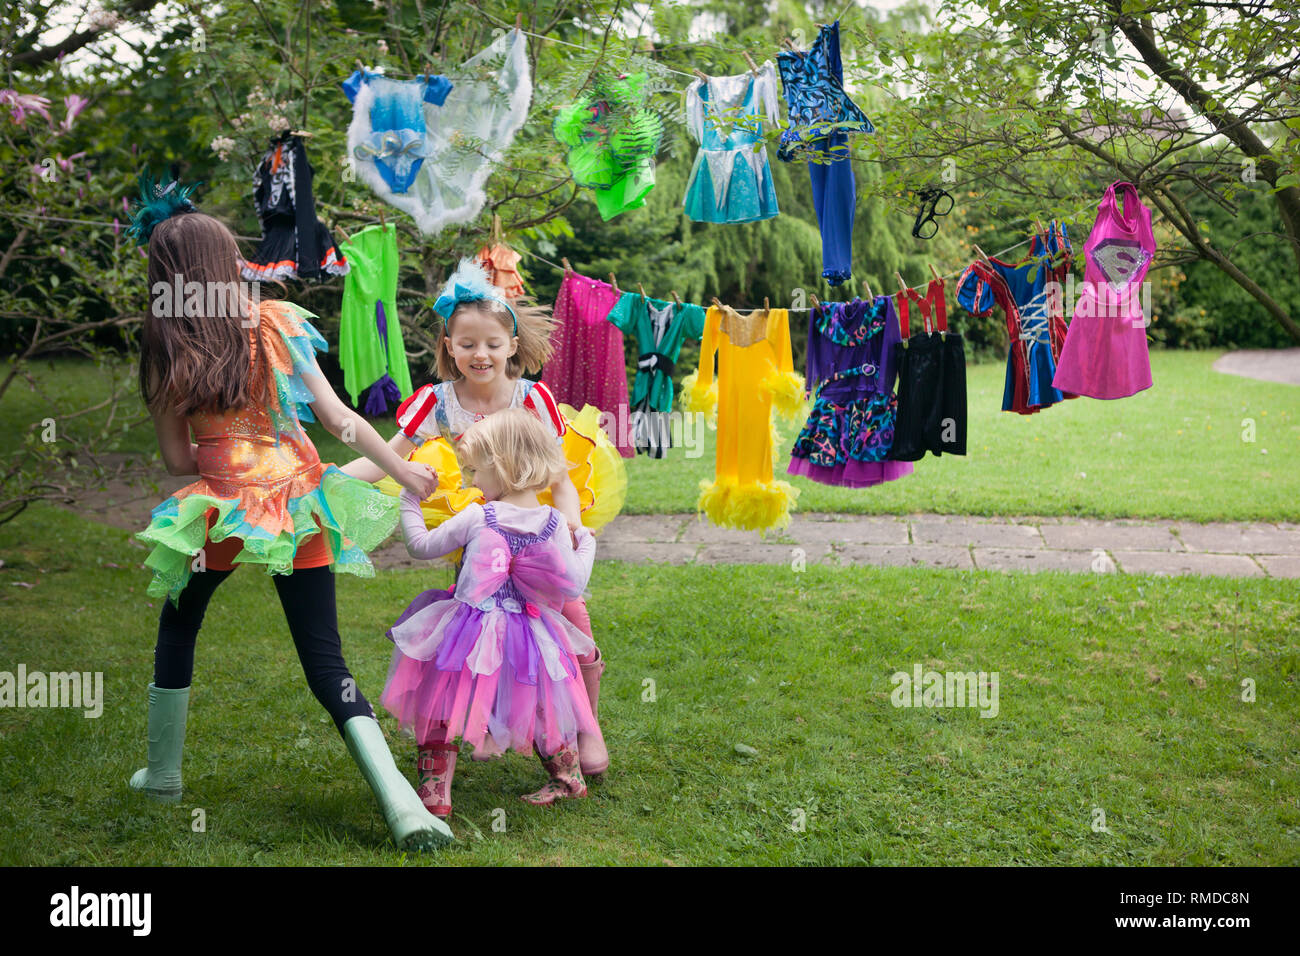 Three children dancing in a back yard surrounded by colourful washing on a clothes line. Stock Photo